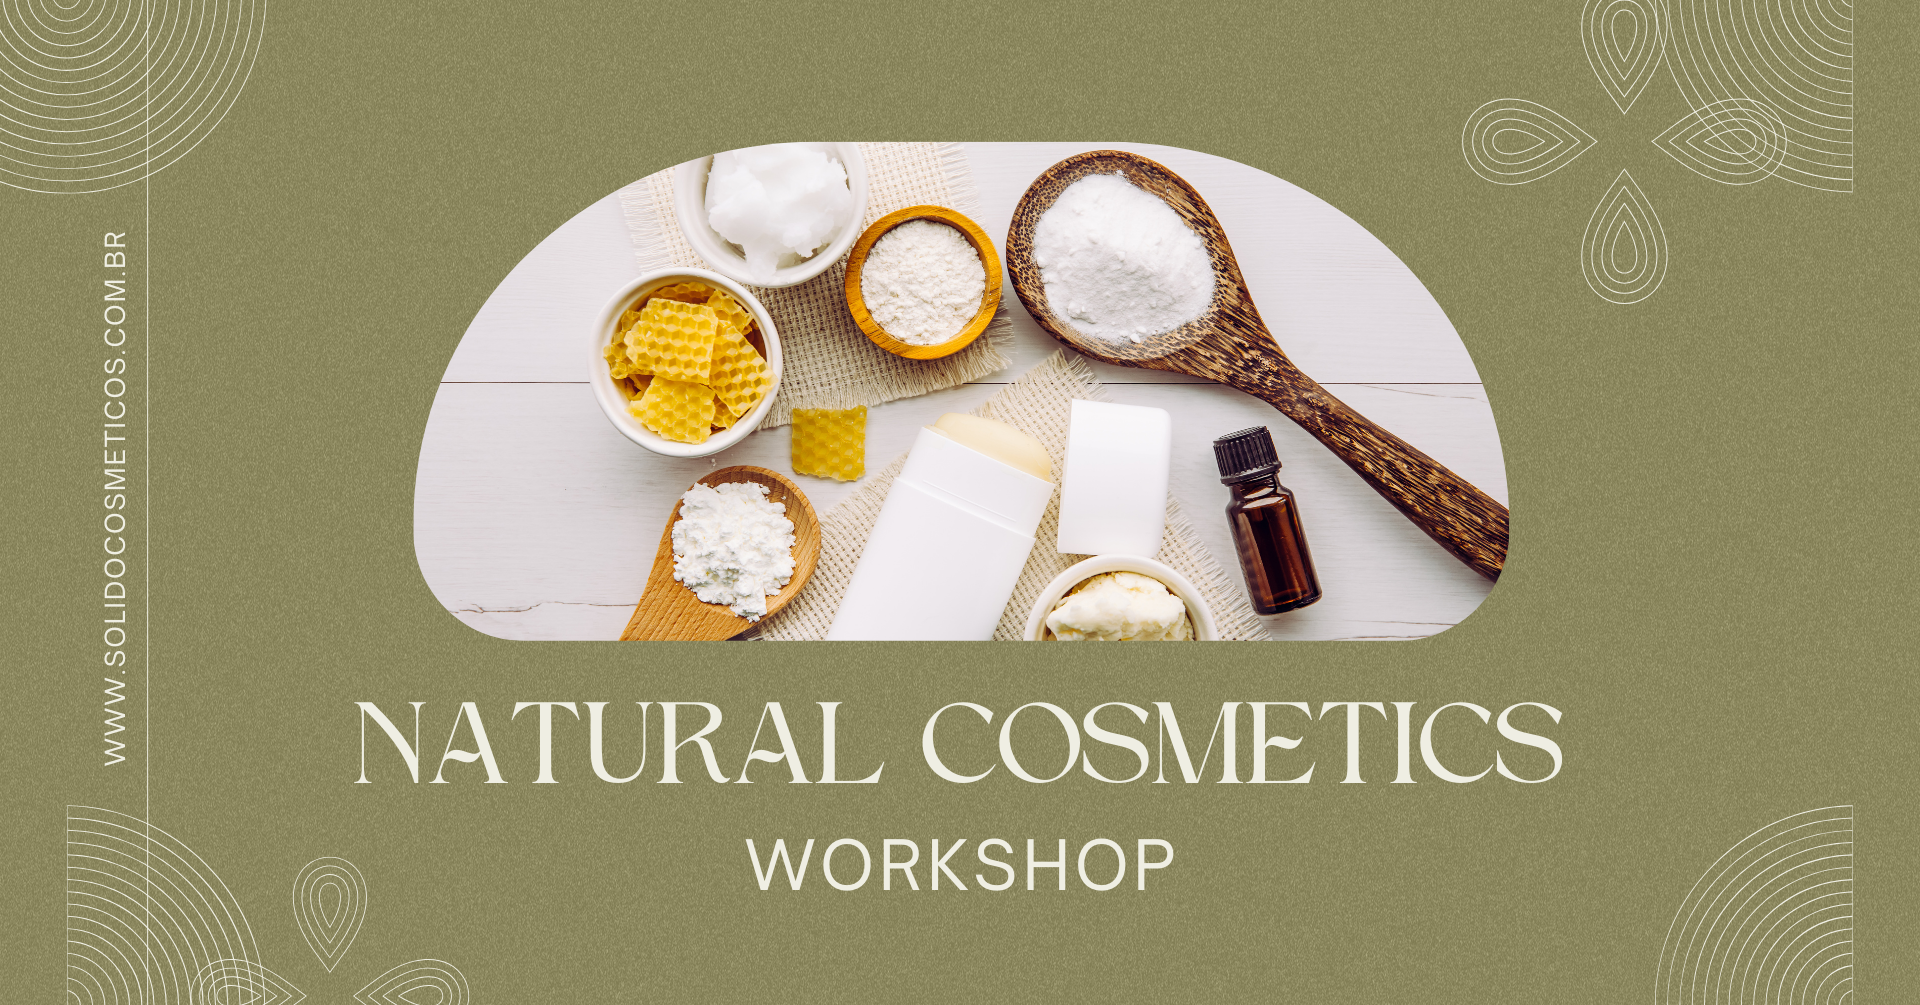 Make Your Own Deodorant: Natural Cosmetics Workshop